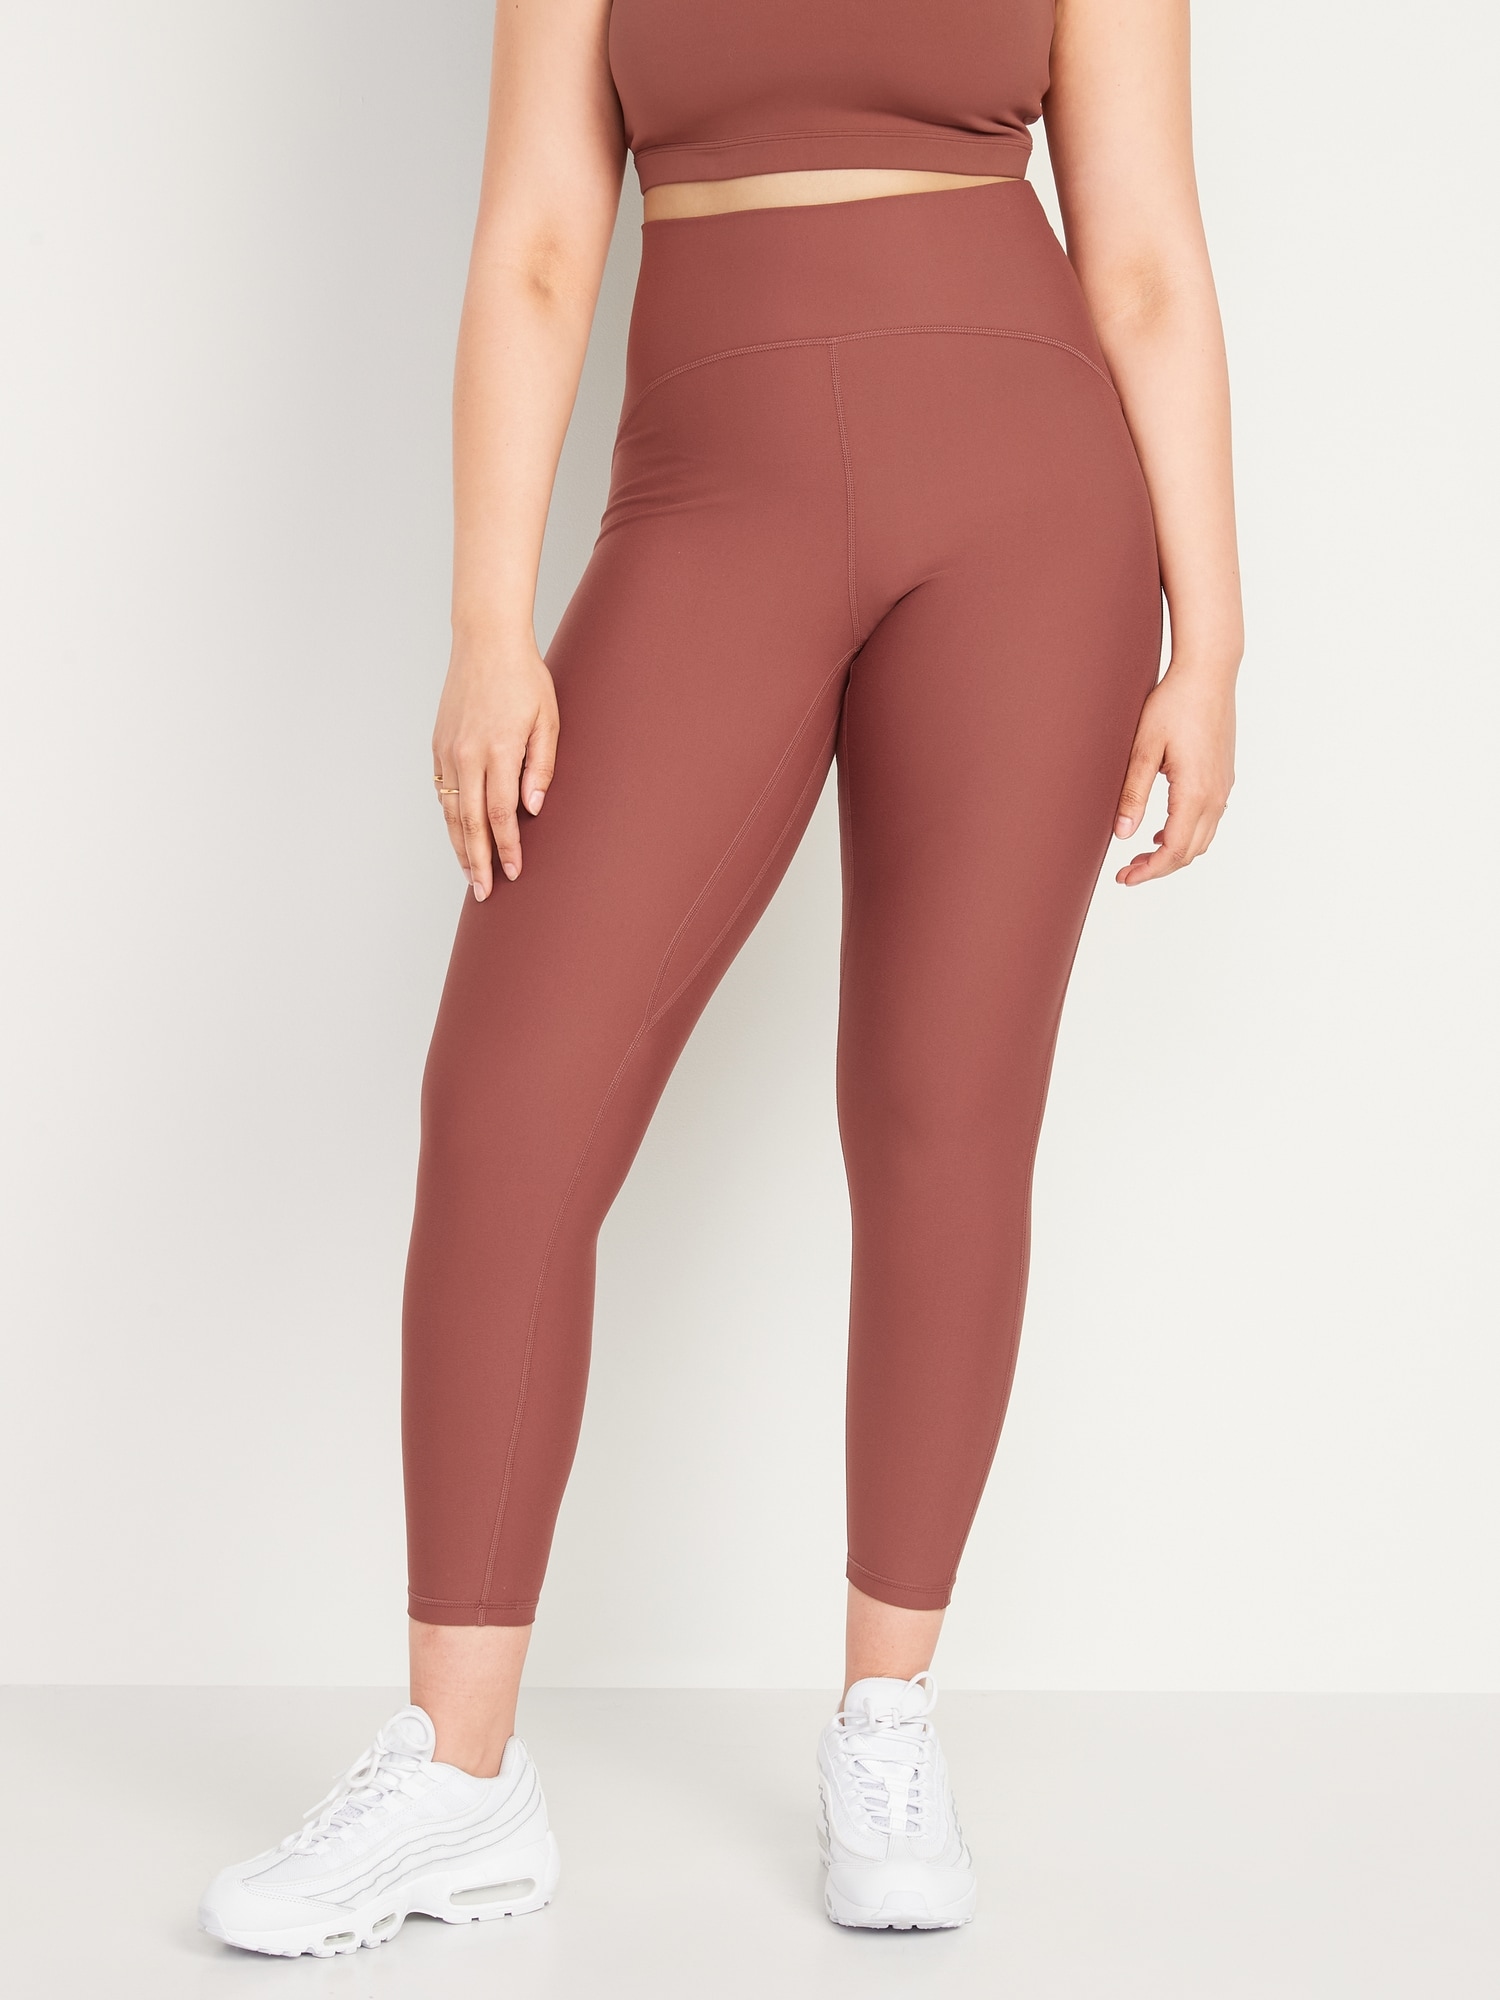 Extra High-Waisted PowerLite Lycra® ADAPTIV Cropped Leggings for